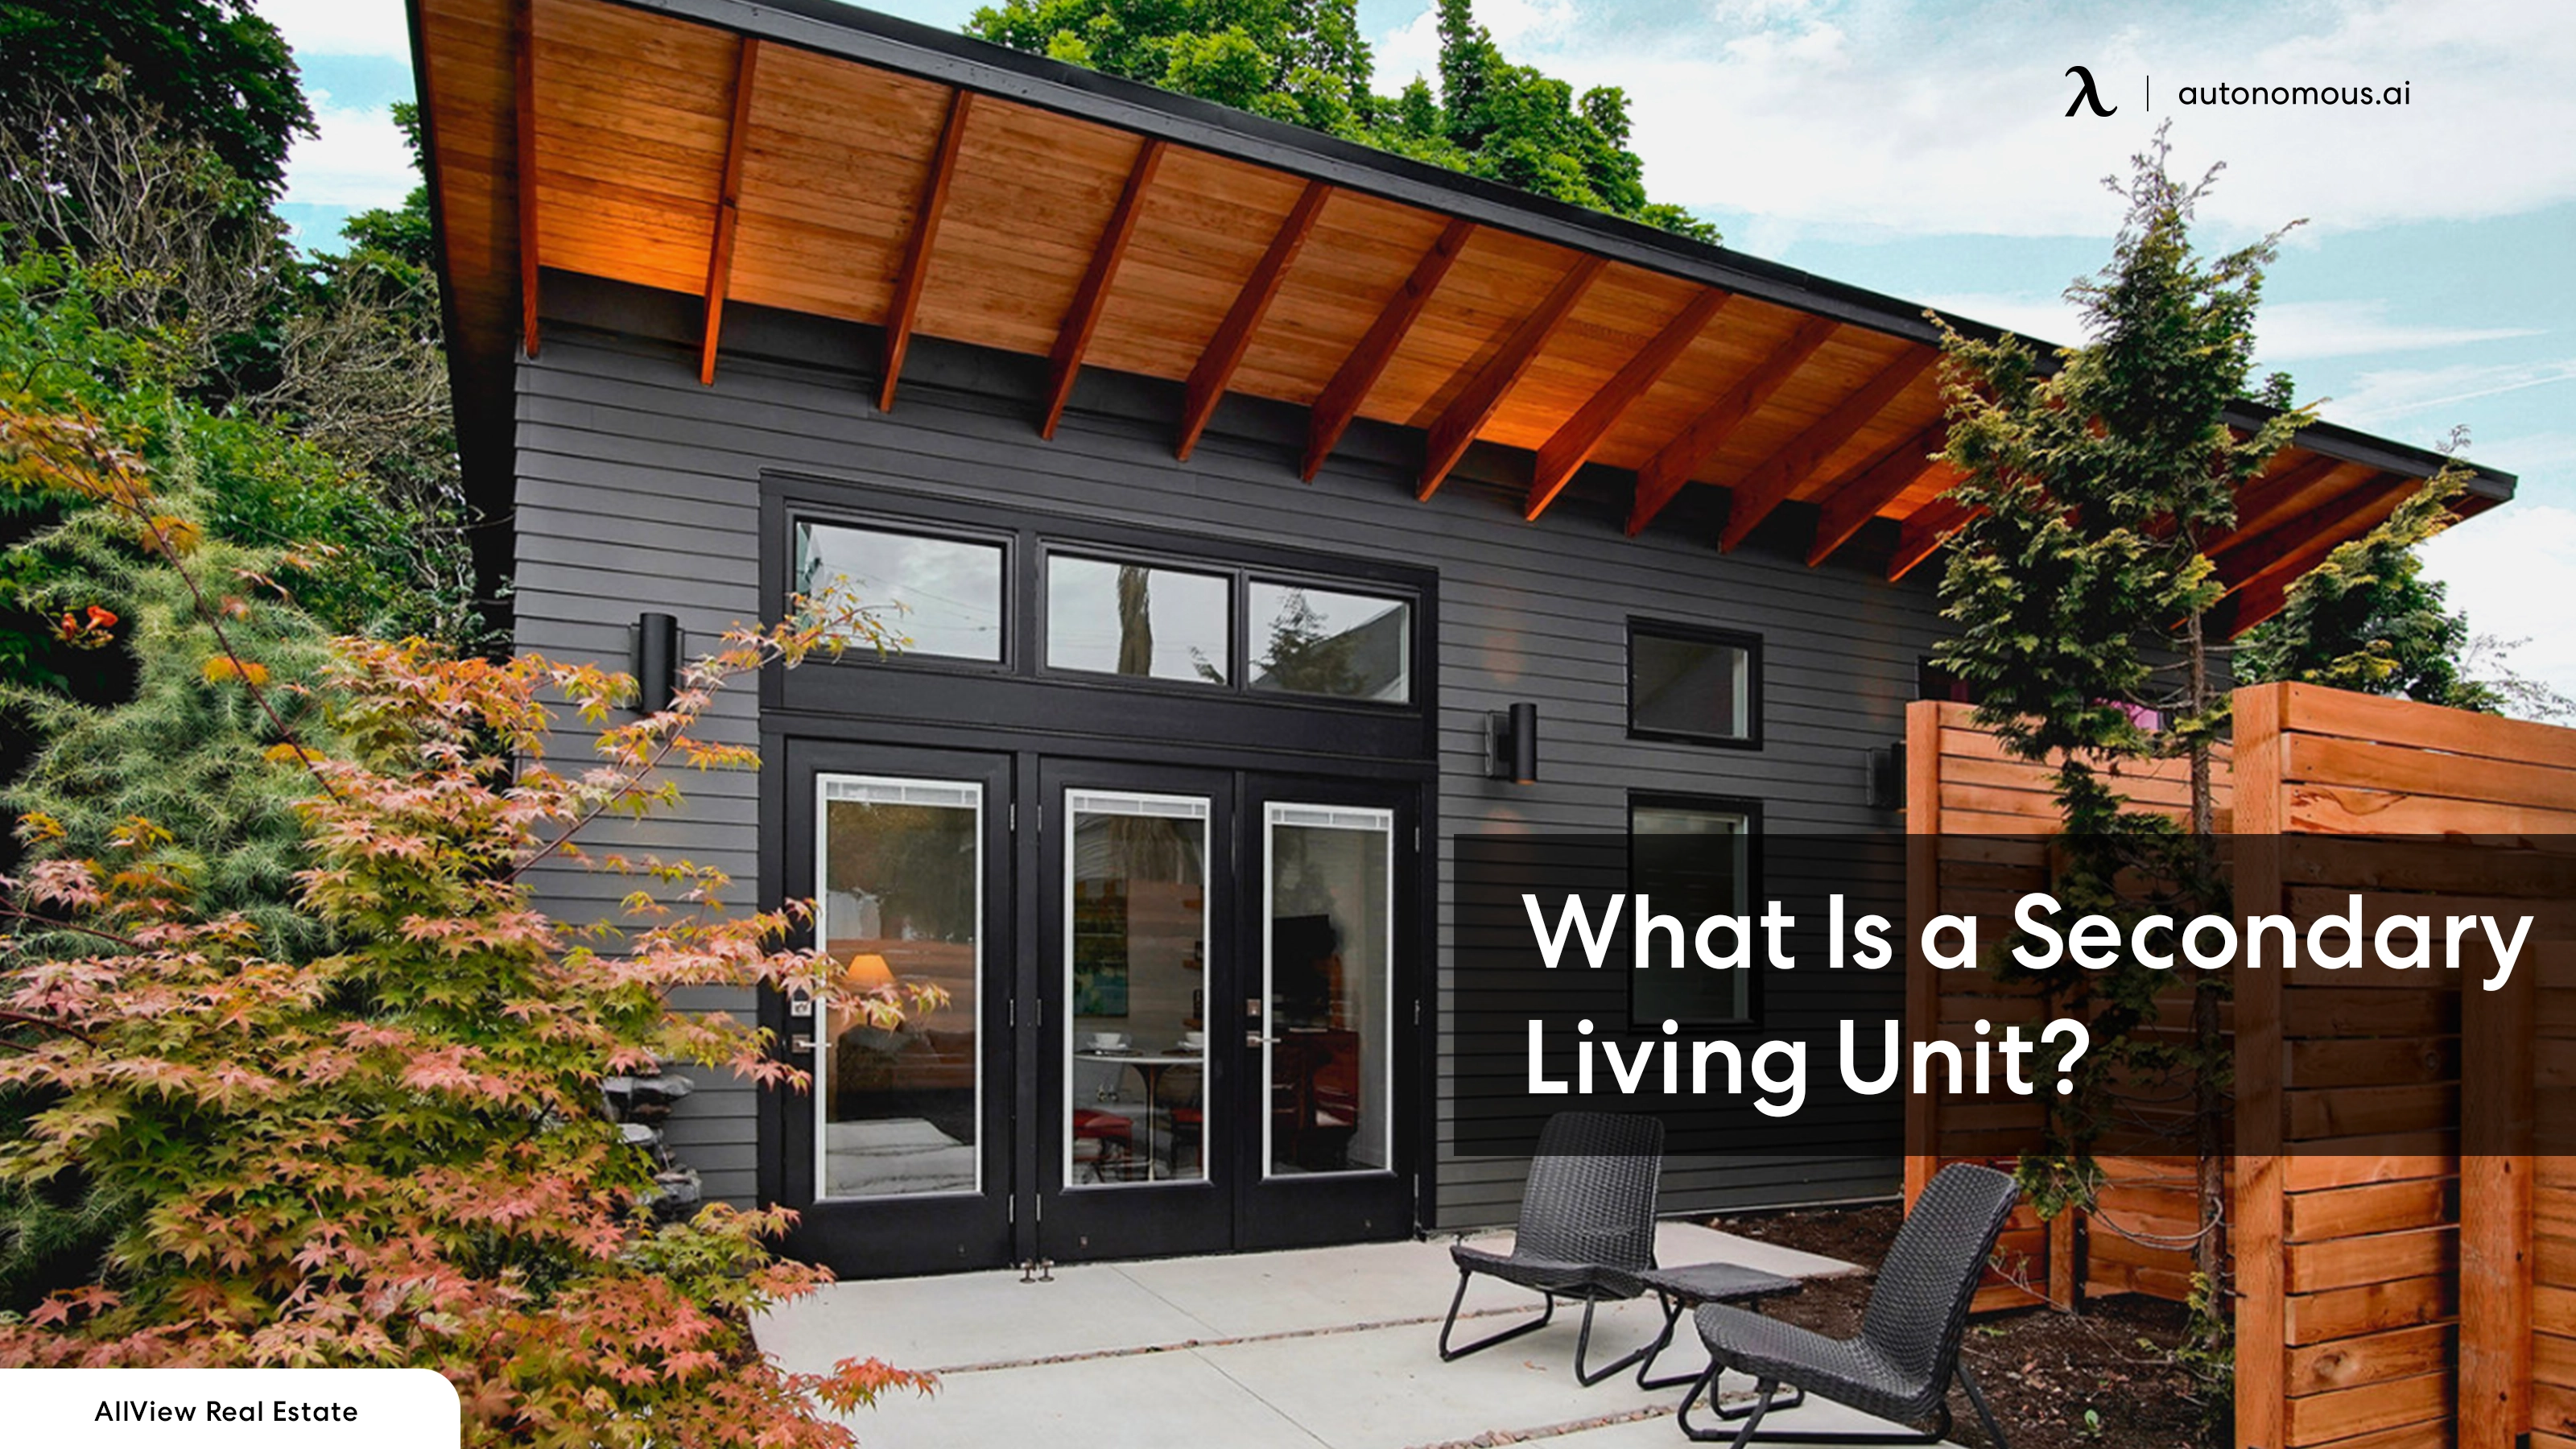 Adding Value to Your Property with Secondary Living Units